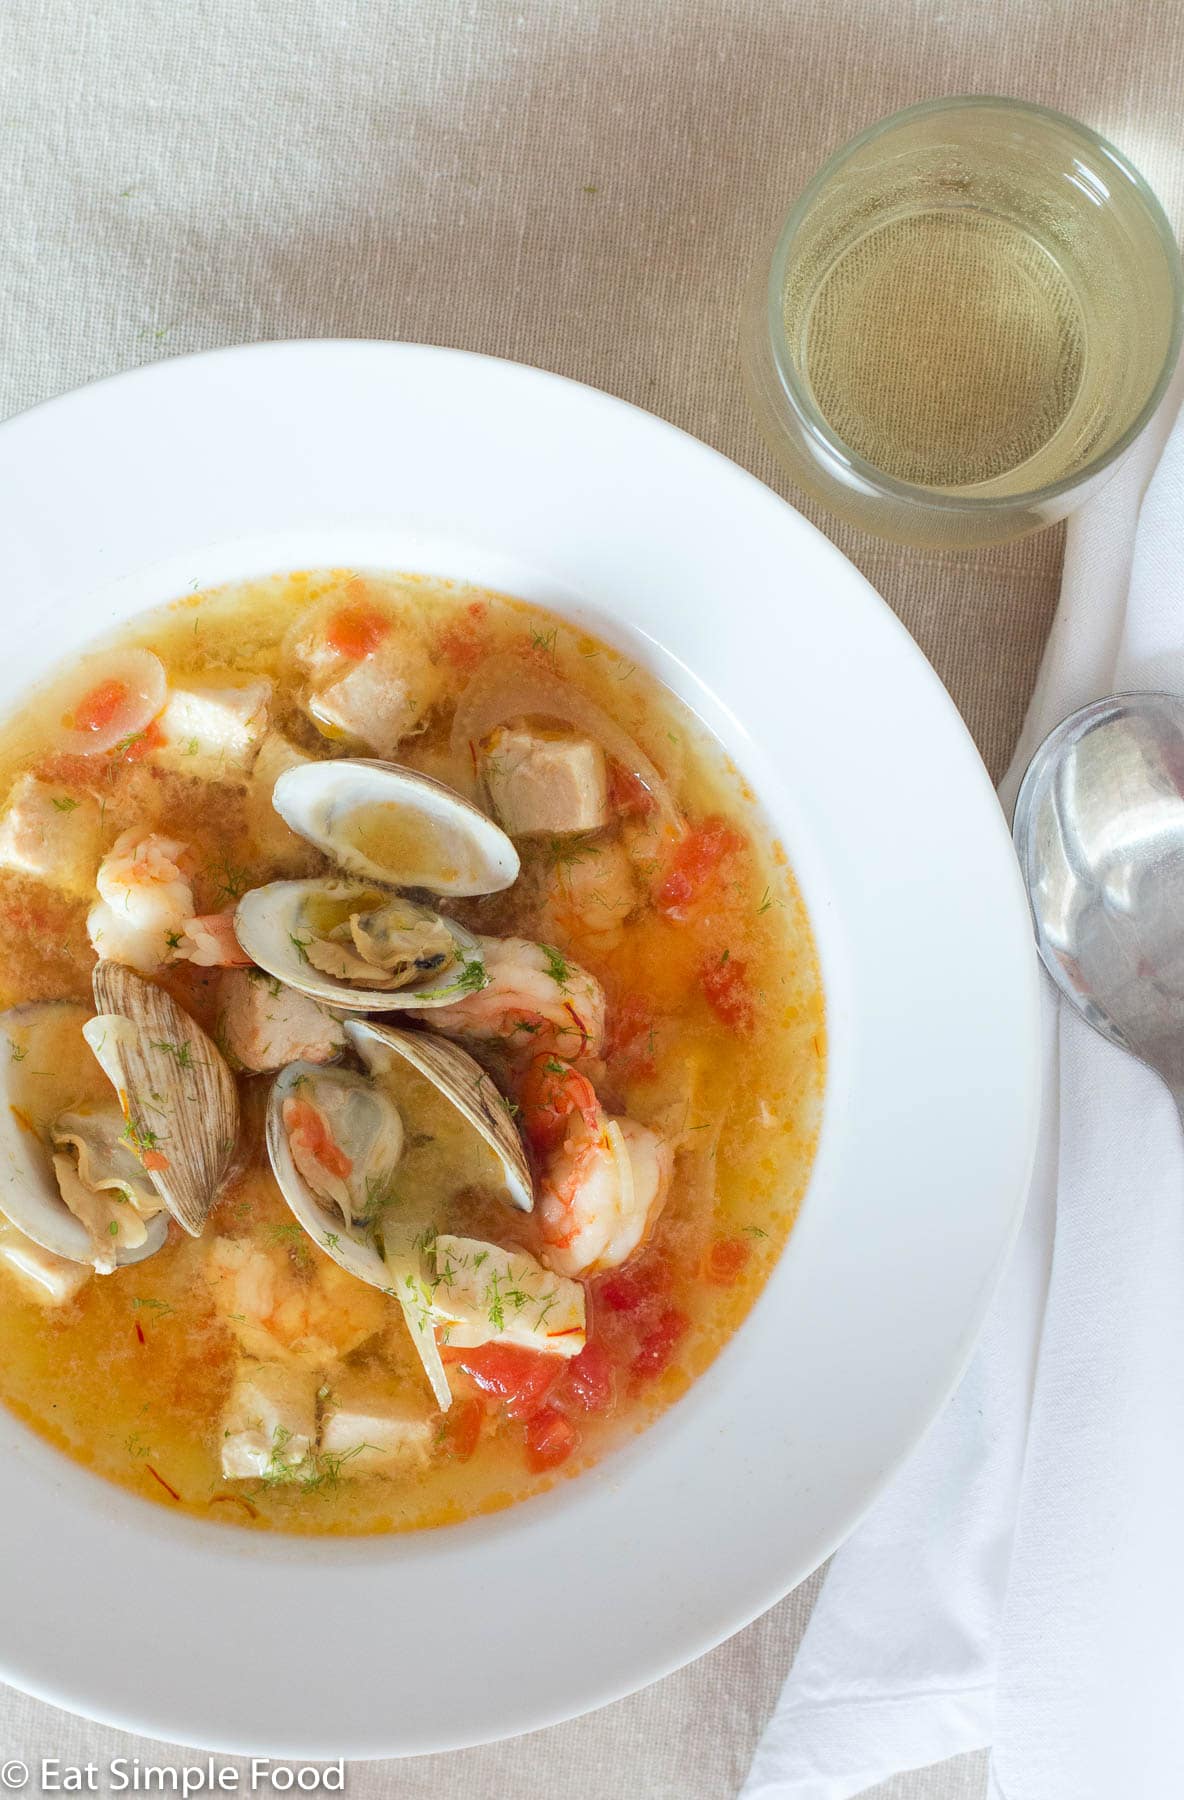 Bouillabaisse (Fish or Seafood Stew) In a white bowl with clams, shrimp, and chunks of white fish in a yellow red delicate sauce.